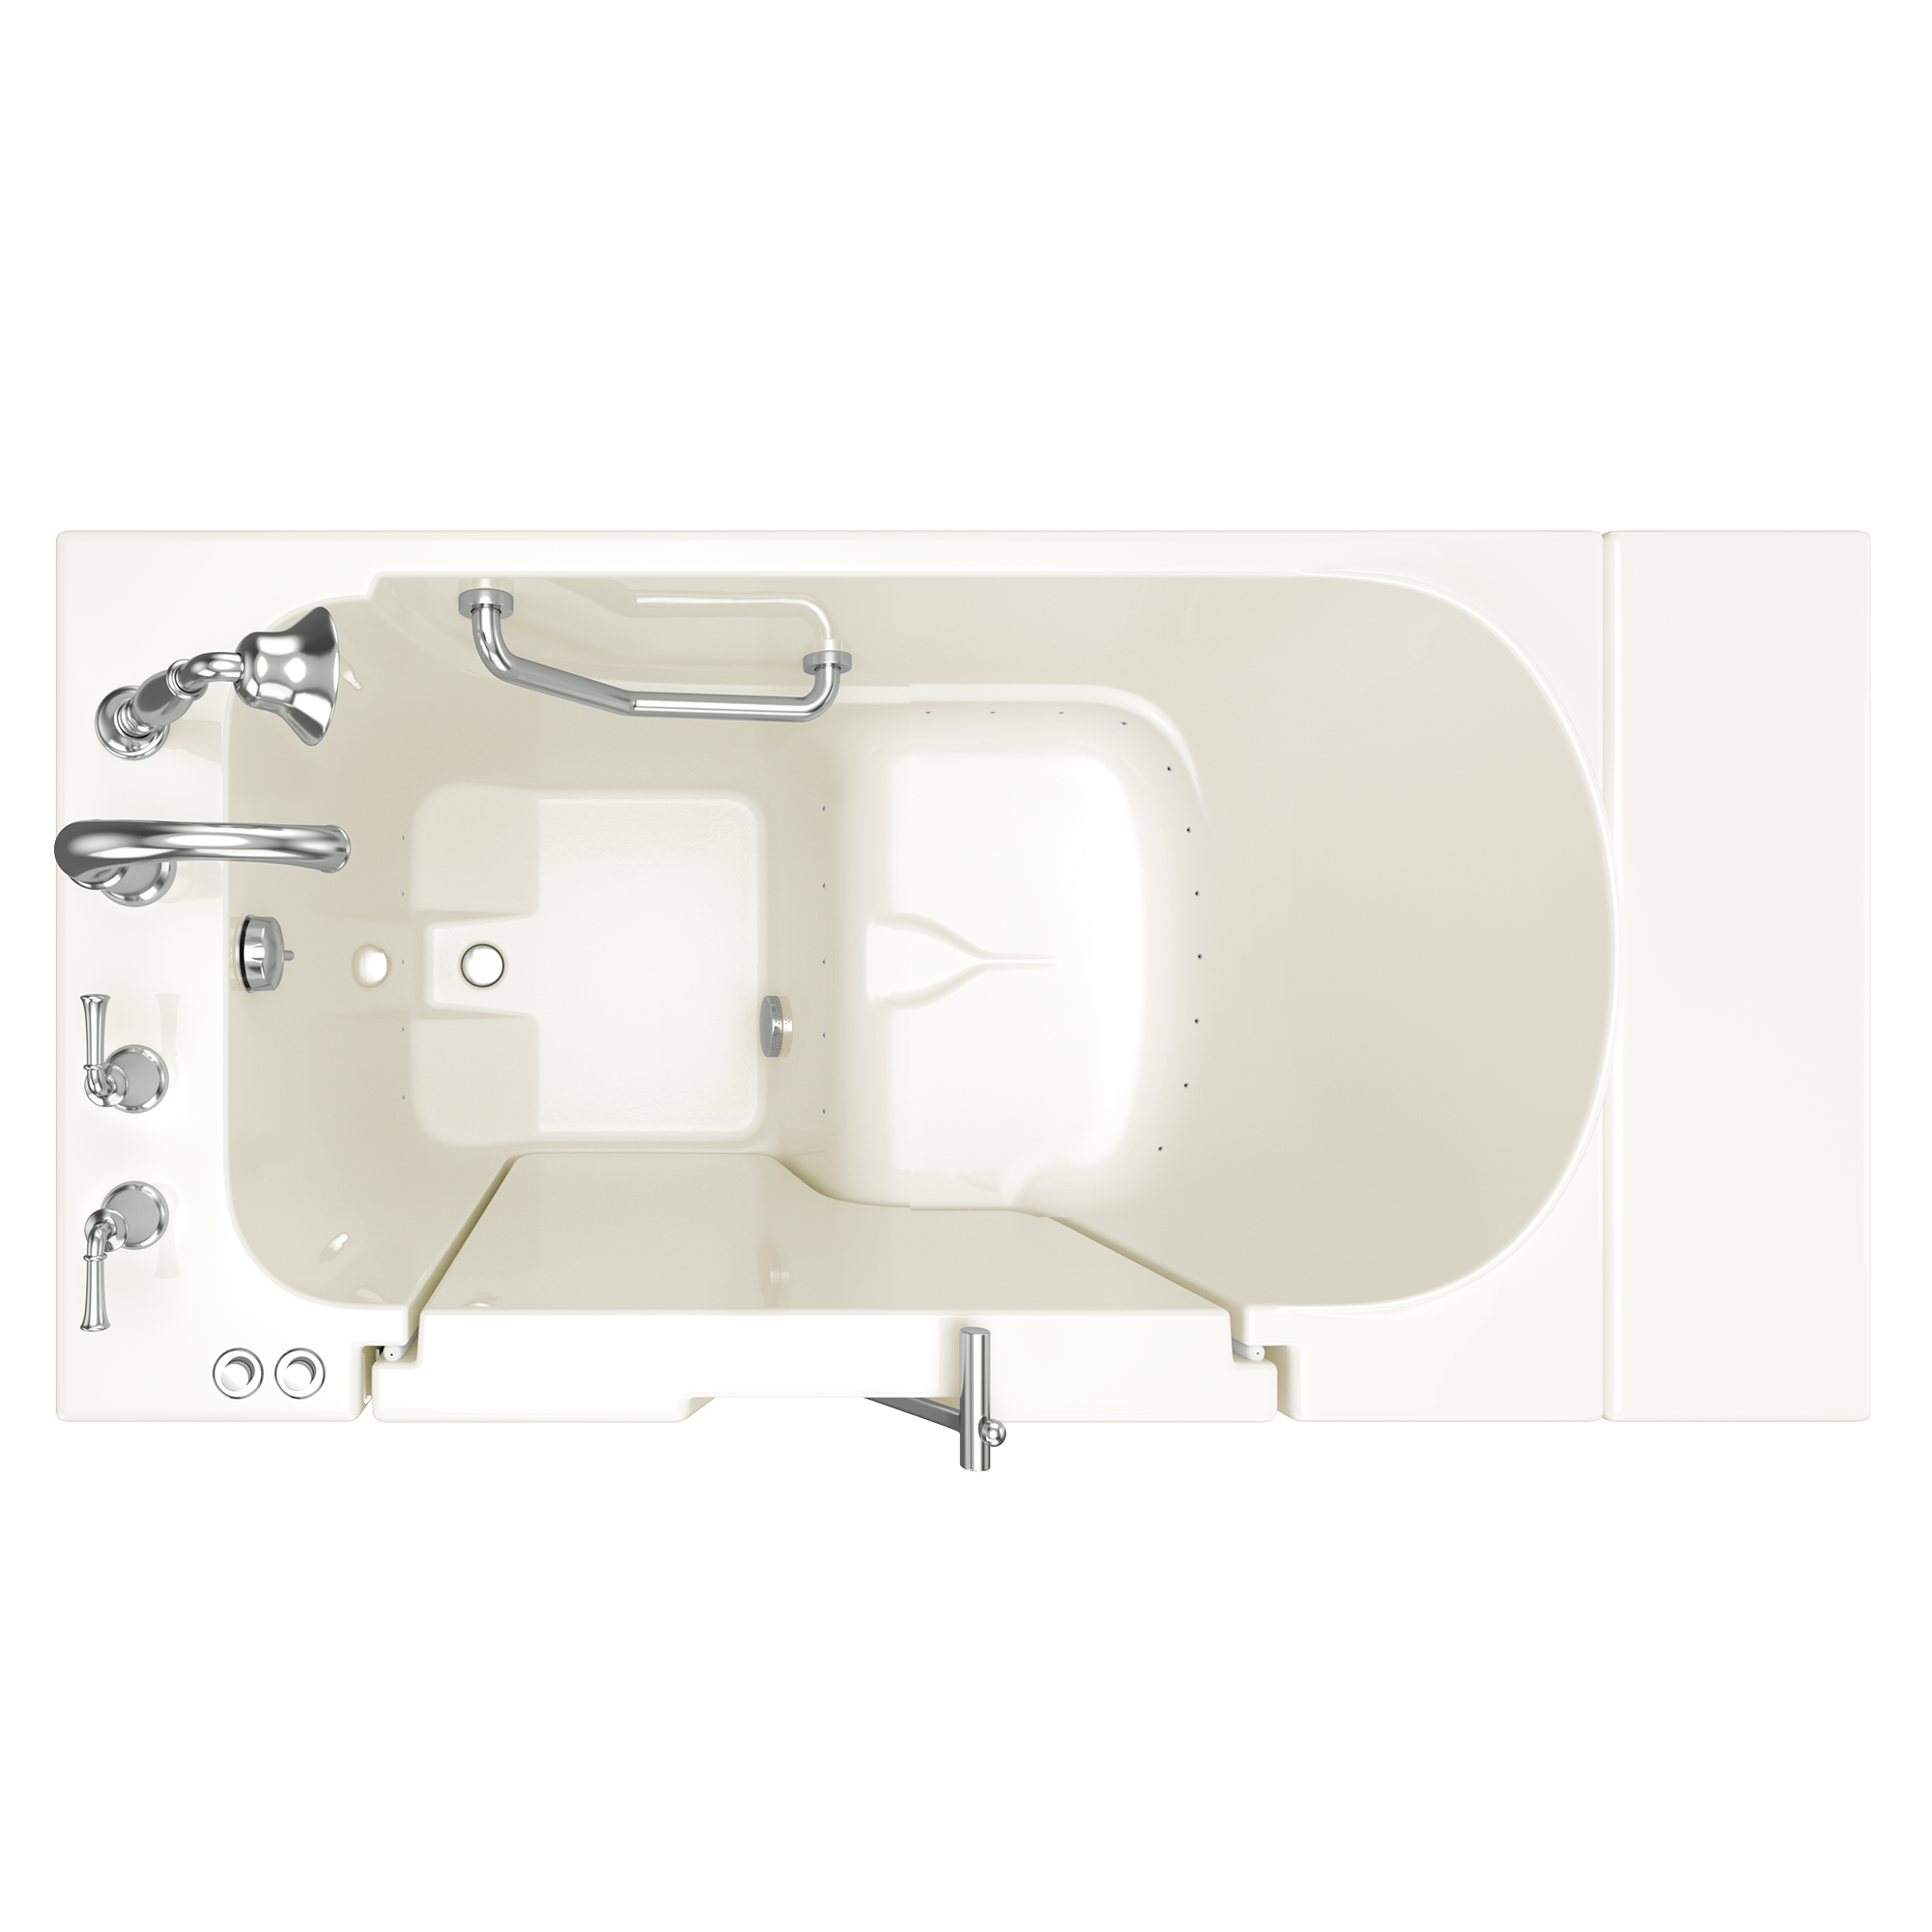 Gelcoat Value Series 30 x 52 -Inch Walk-in Tub With Air Spa System - Left-Hand Drain With Faucet